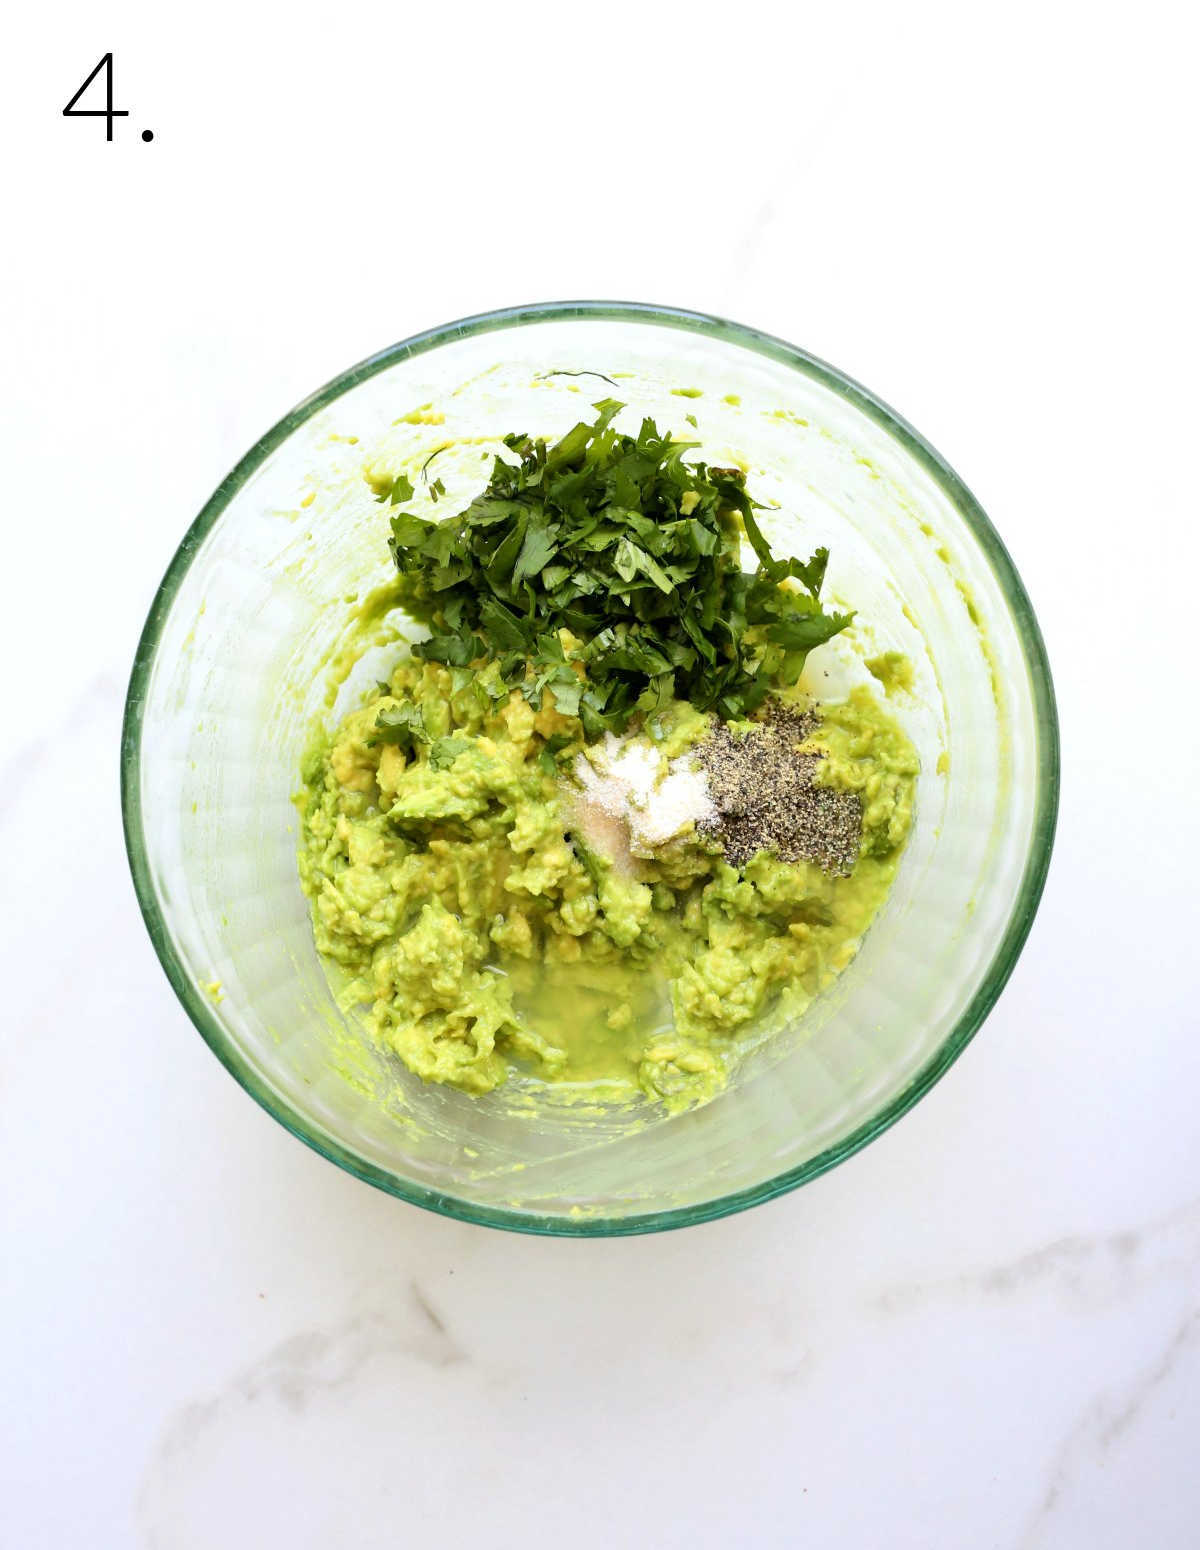 Mixing Bowl with Avocado, Cilantro, Lime Juice, Salt and Pepper.